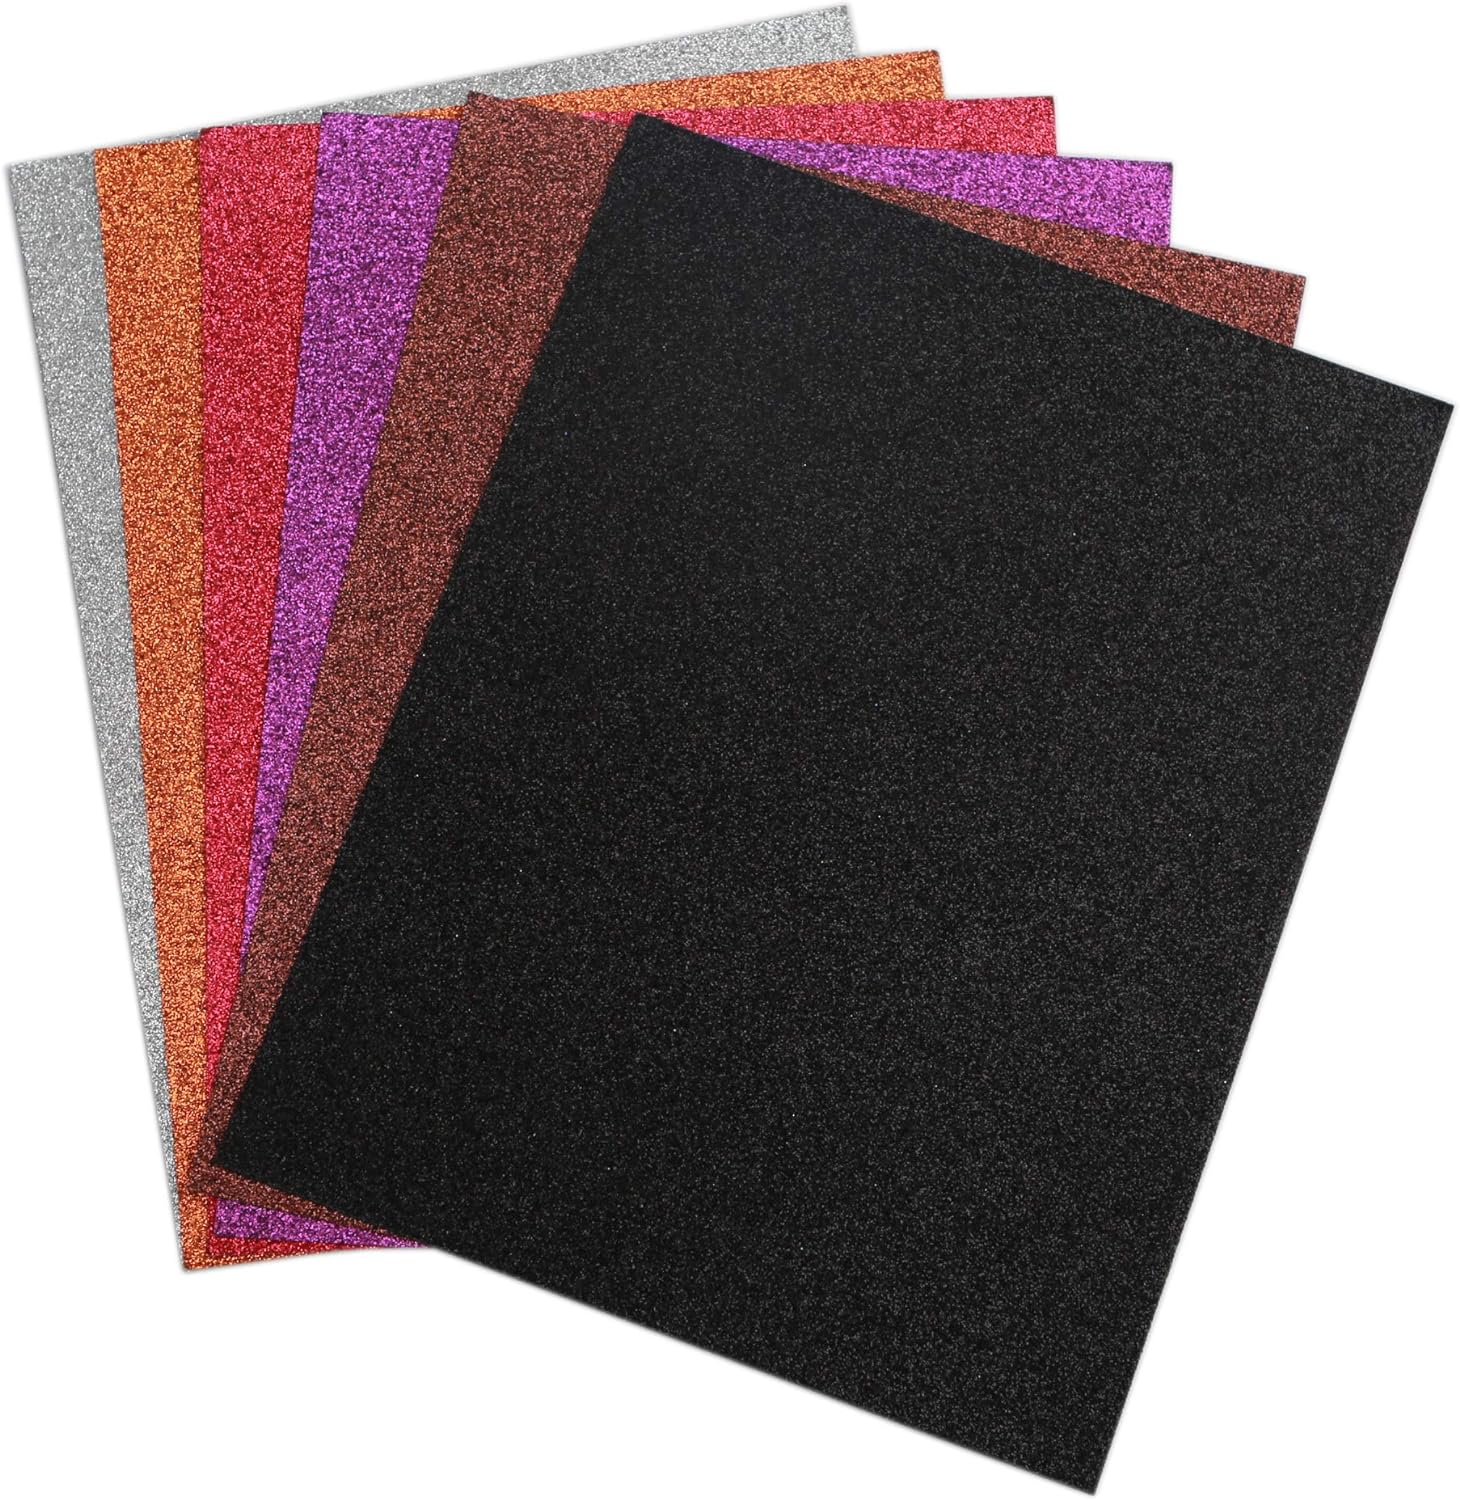 16 Pack Glitter Eva Foam Handicraft Sheets Self-adhesive 8.5x11 Inches Thick And Soft Paper For DIY Projects 12 Assorted Colors By PAIDU